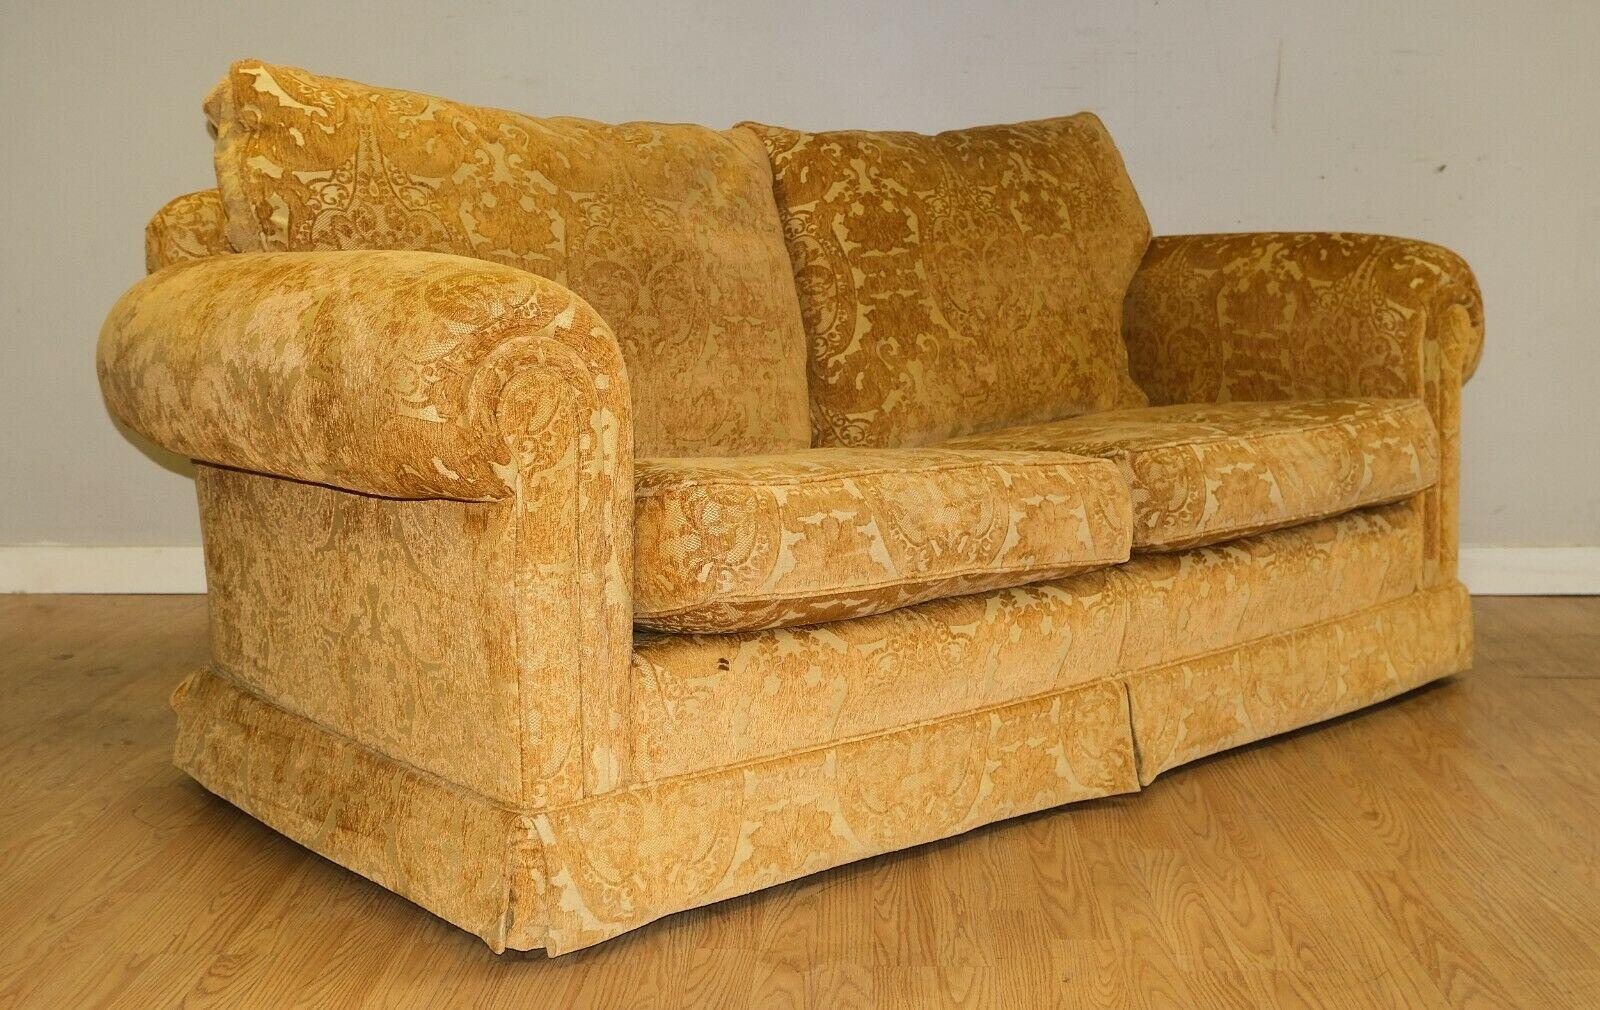 We are delighted to offer for sale this comfortable Duresta Walford, Tumeric colour two seater sofa.

This is an English hand made, traditional style, comfortable sofa that offers you plenty of space for two people to sit comfortably. The back